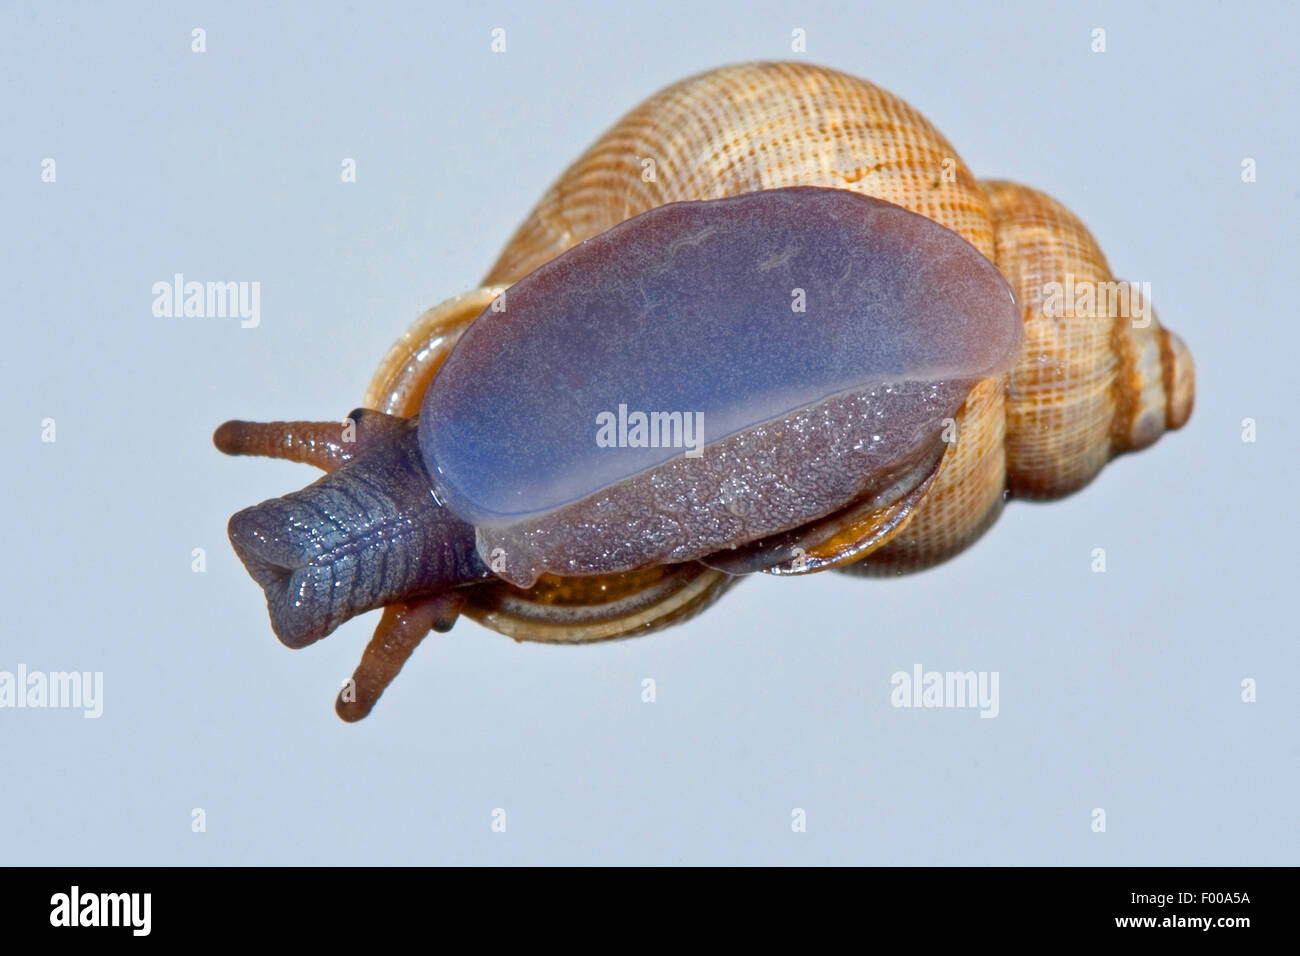 Red-mouthed snail, Round-mouthed snail (Pomatias elegans), creeping on a pane of glass, Germany Stock Photo